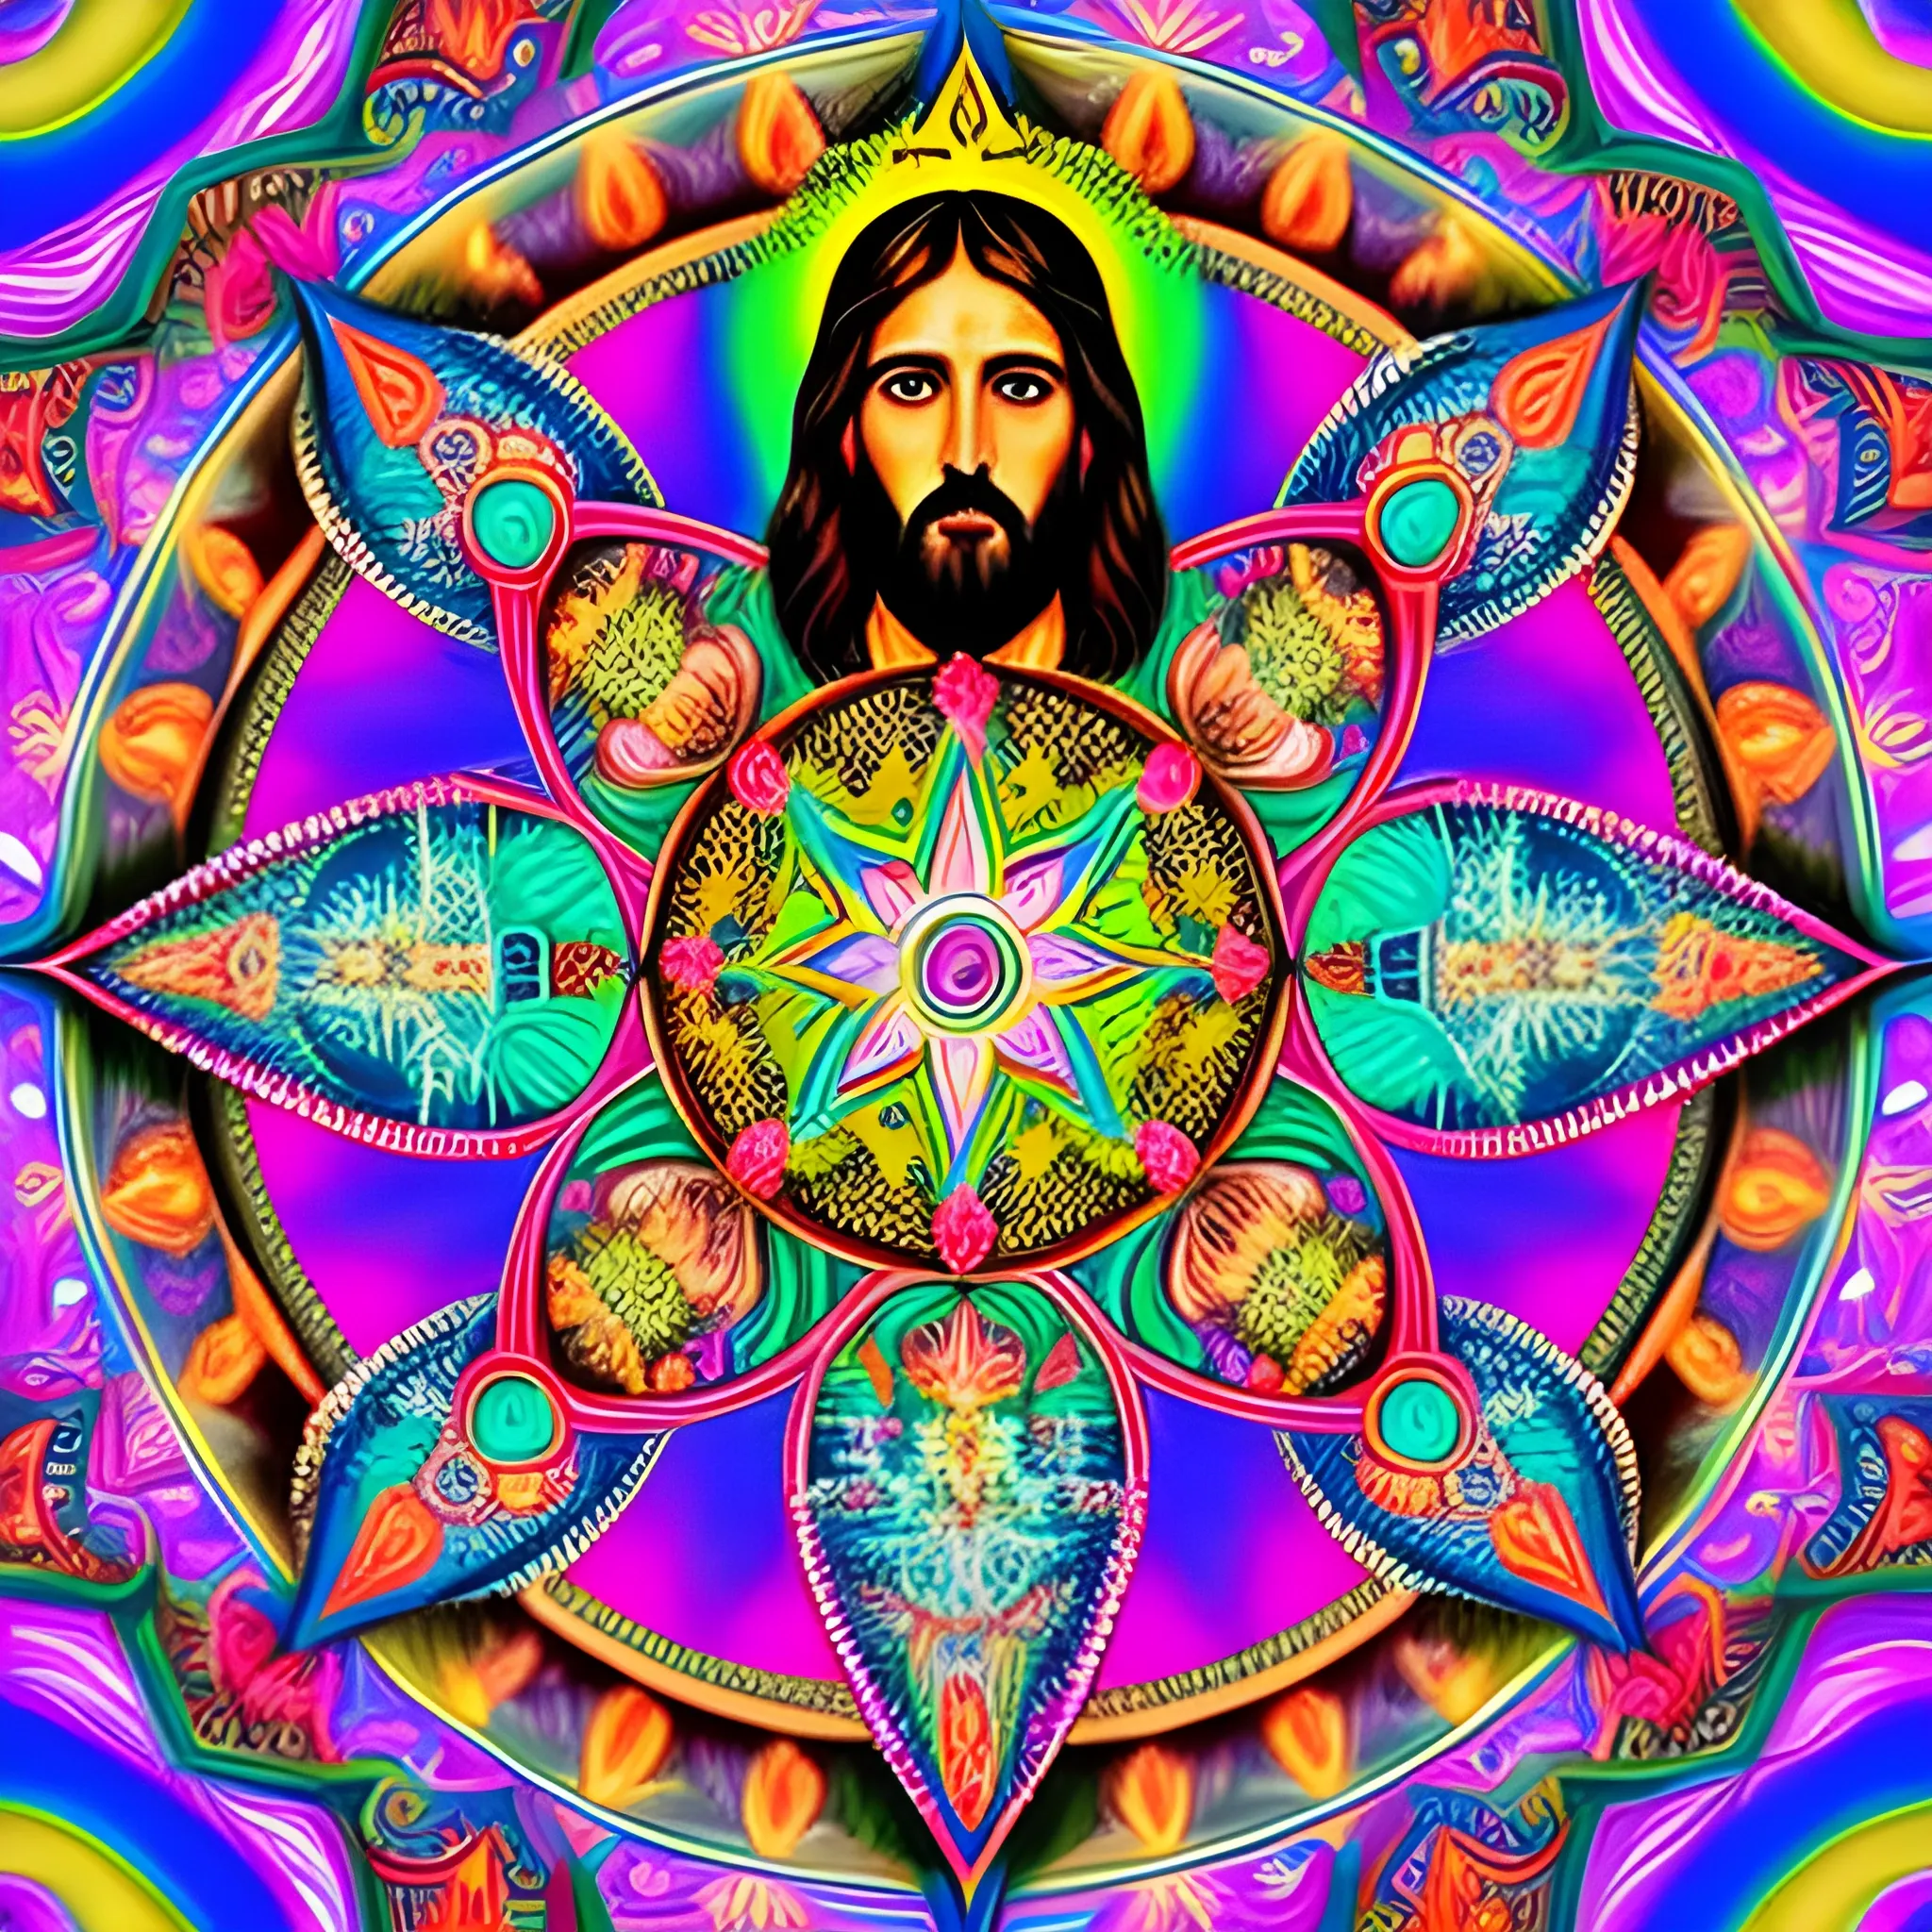 Jesus with PSYCHEDELIC, MANDALA, and SACRED GEOMETRY in the background

